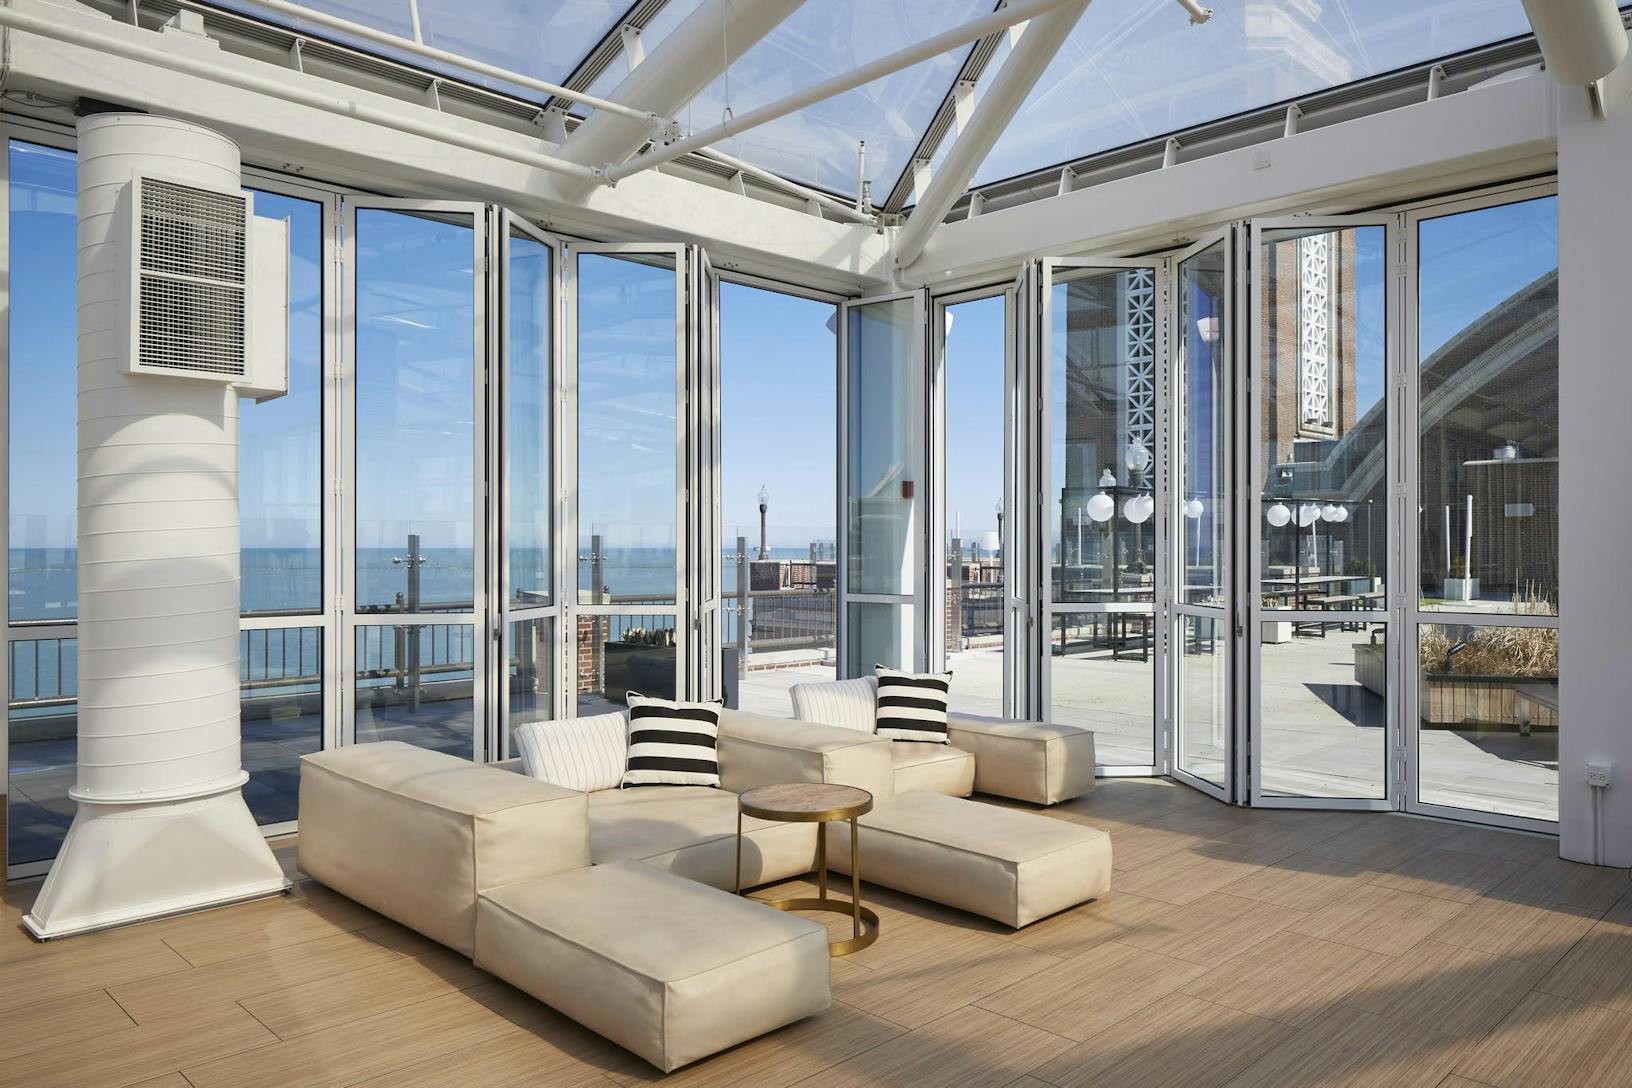 SL70 large offshore navy pier building exterior with large opening glass walls